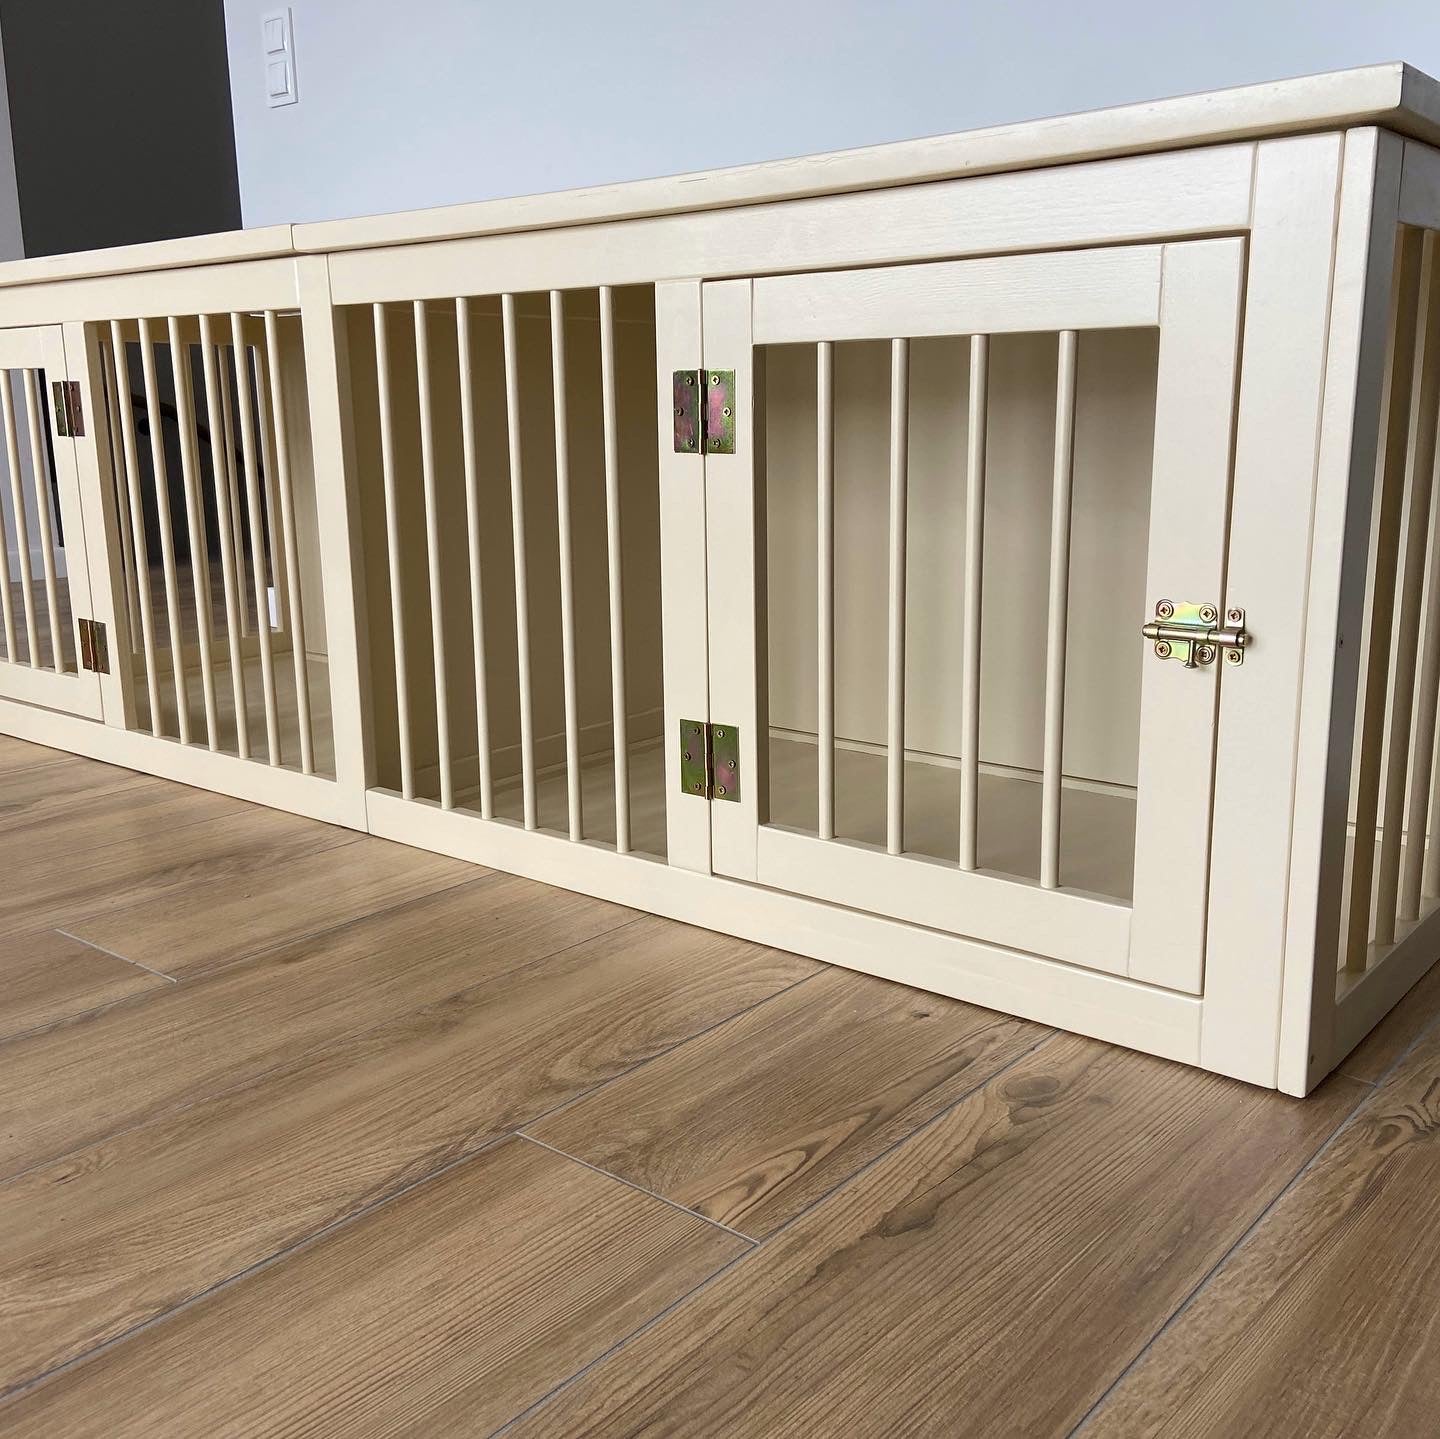 Double house for dog, home kennel for your pet made of natural wood - WoW WooD